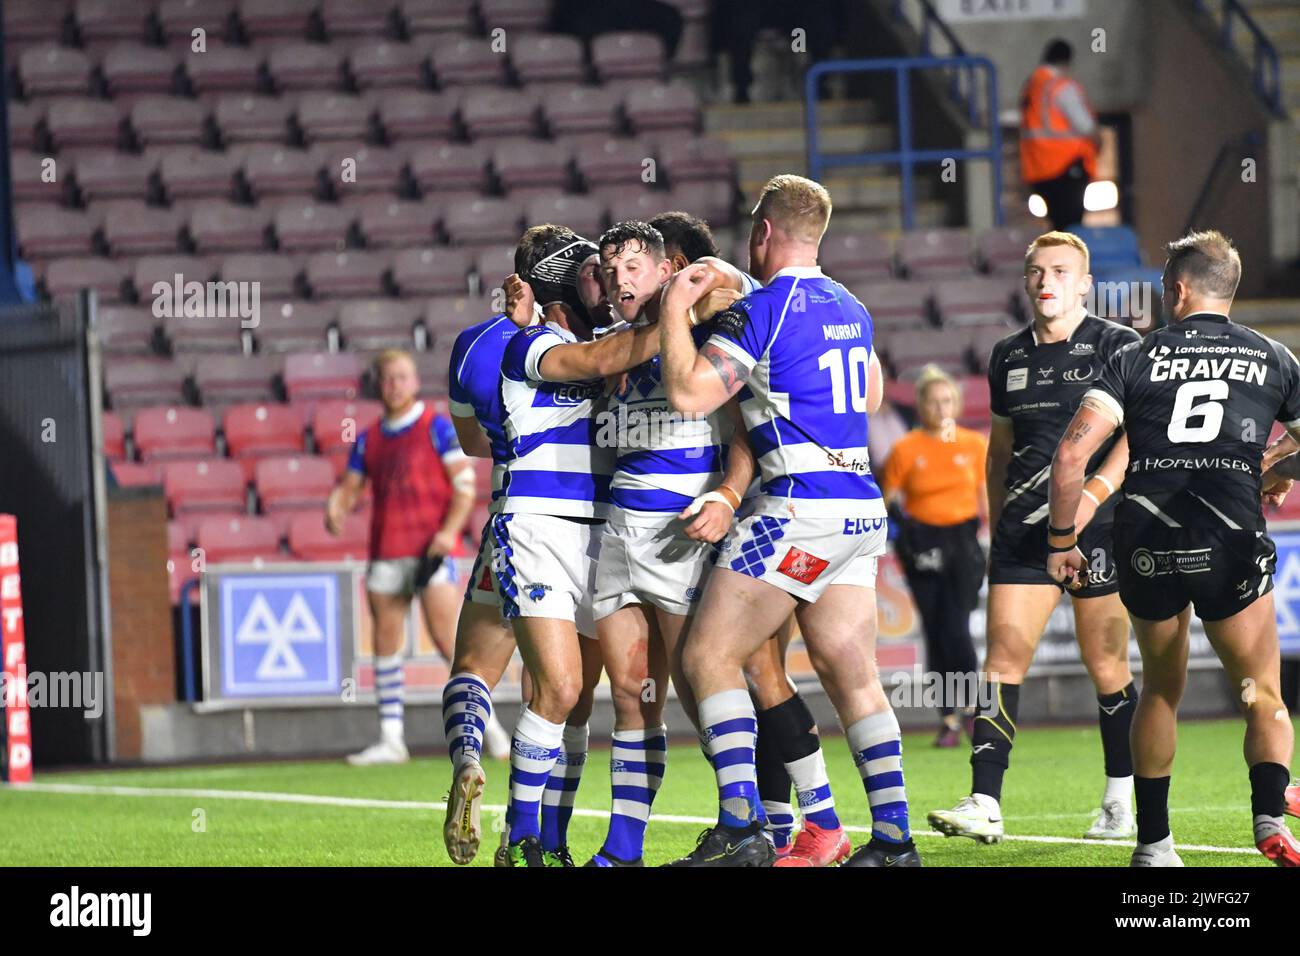 DCBL Stadium, Widnes, England. 5th September 2022. Betfred Championship, Widnes Vikings versus Halifax Panthers; Matty Gee celebrates scoring the second try of the night for Halifax, Betfred Championship match between Widnes Vikings and Halifax Panthers Credit: Mark Percy/Alamy Live News Credit: MARK PERCY/Alamy Live News Stock Photo